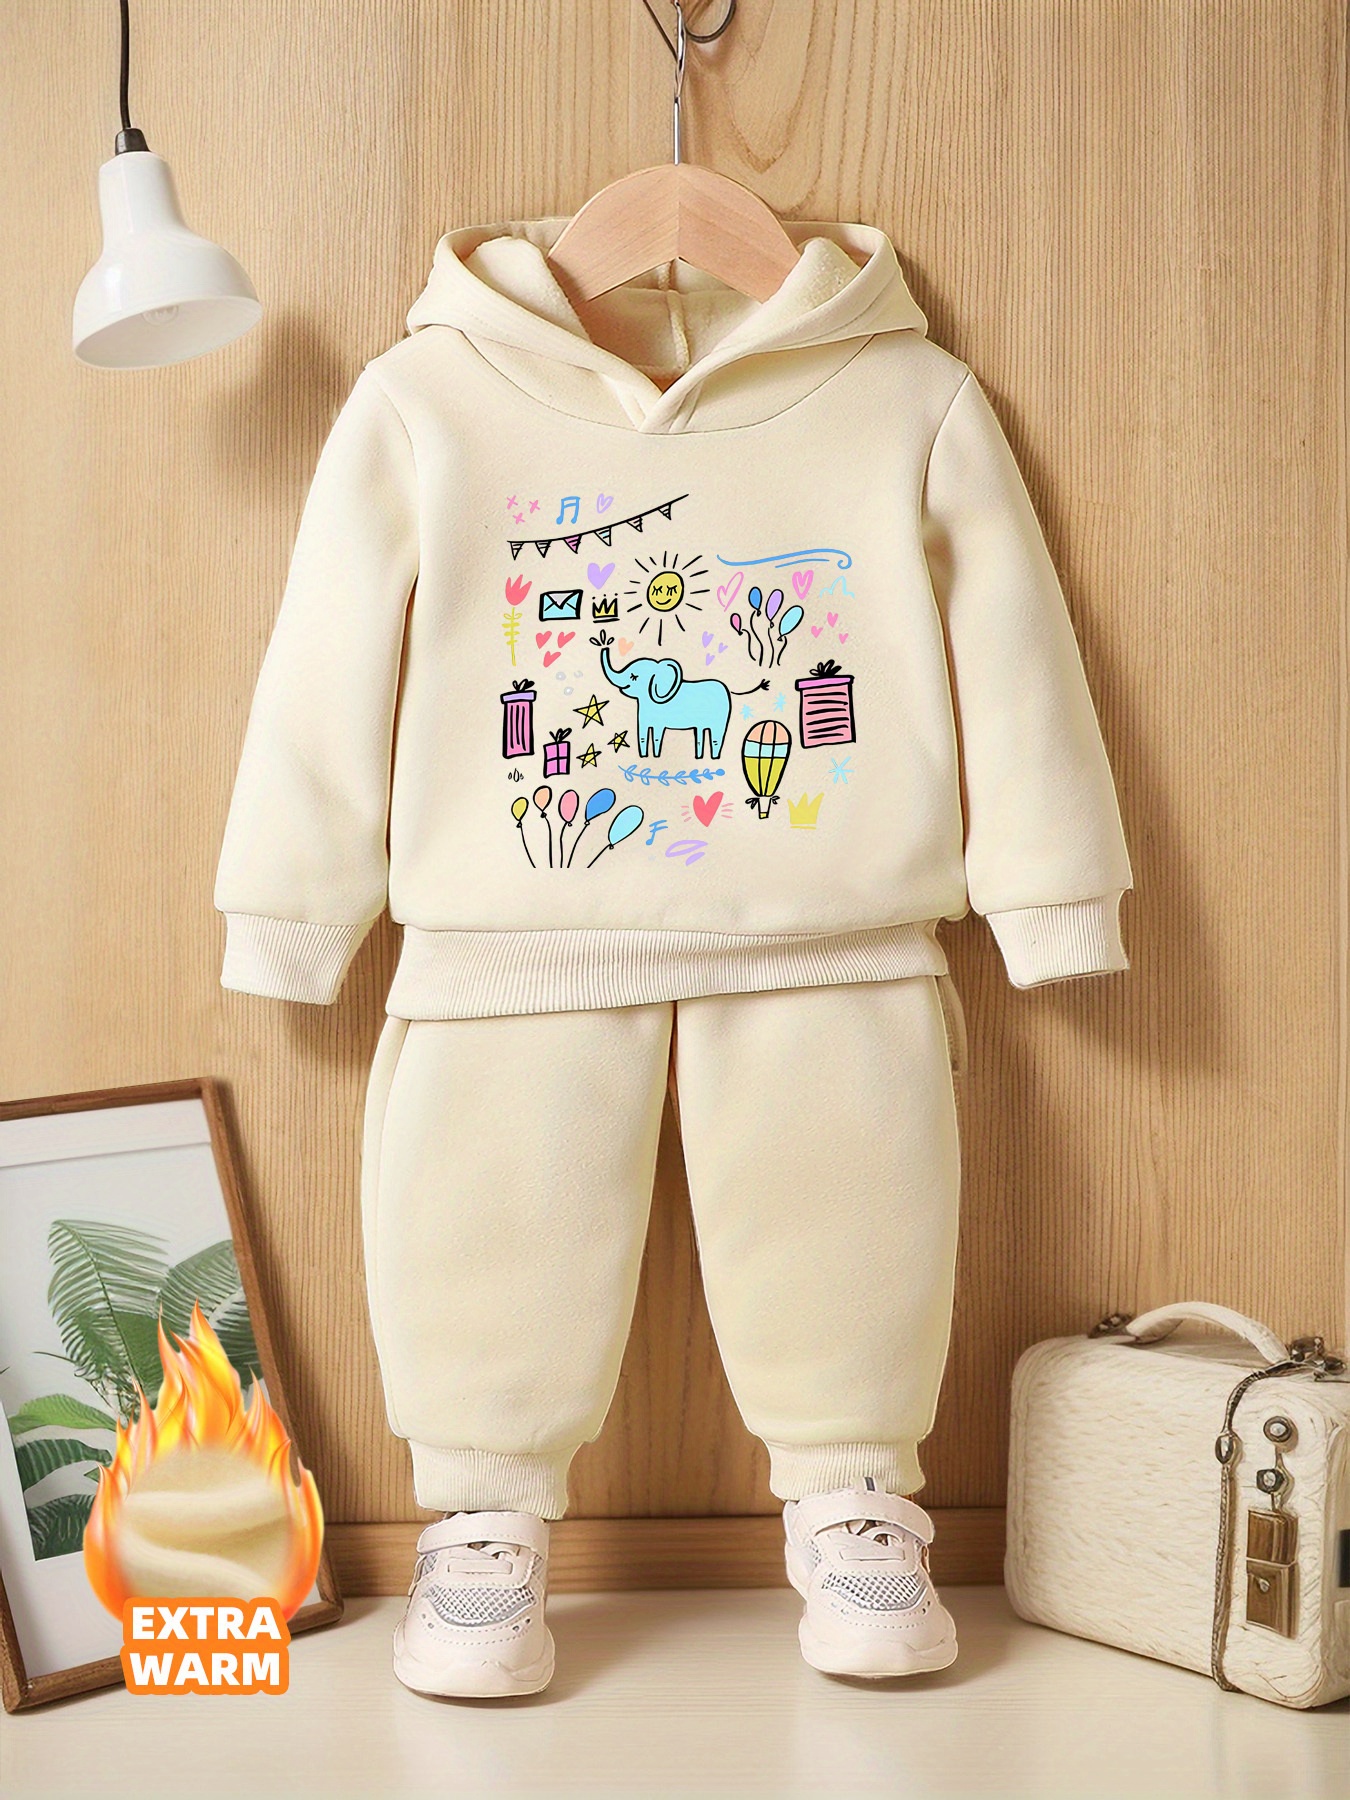 Cute Toddler/Girl Fashionable Sweat Pant and T-Shirt Street Wear Set Size